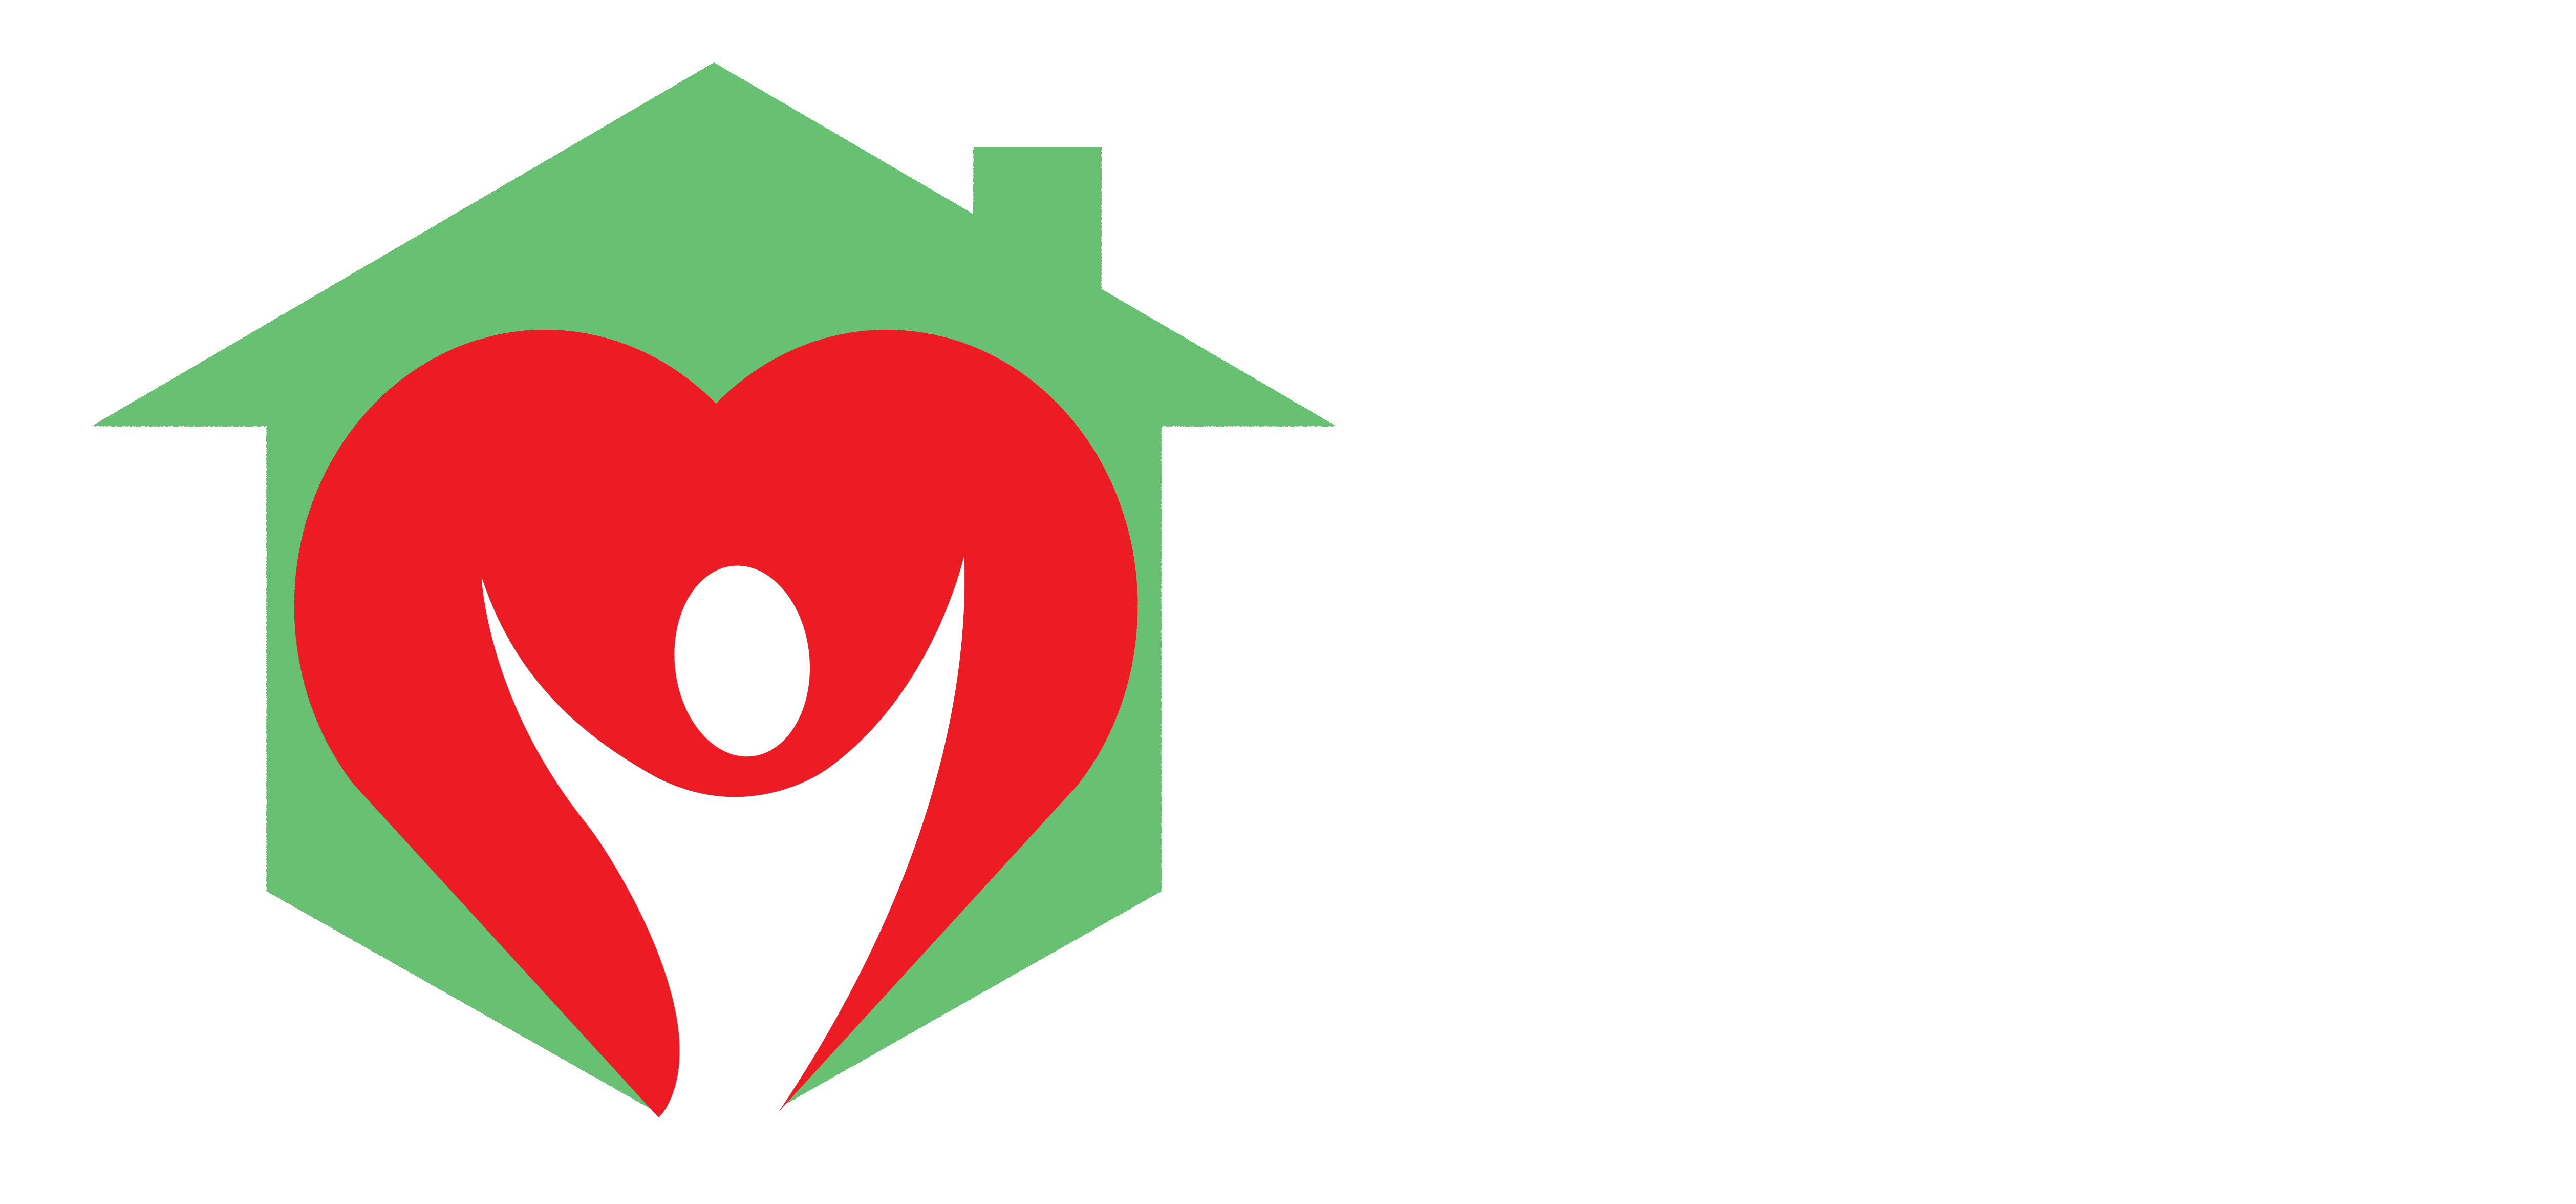 Easy Home Care Solutions - Home Care - Elderly Care